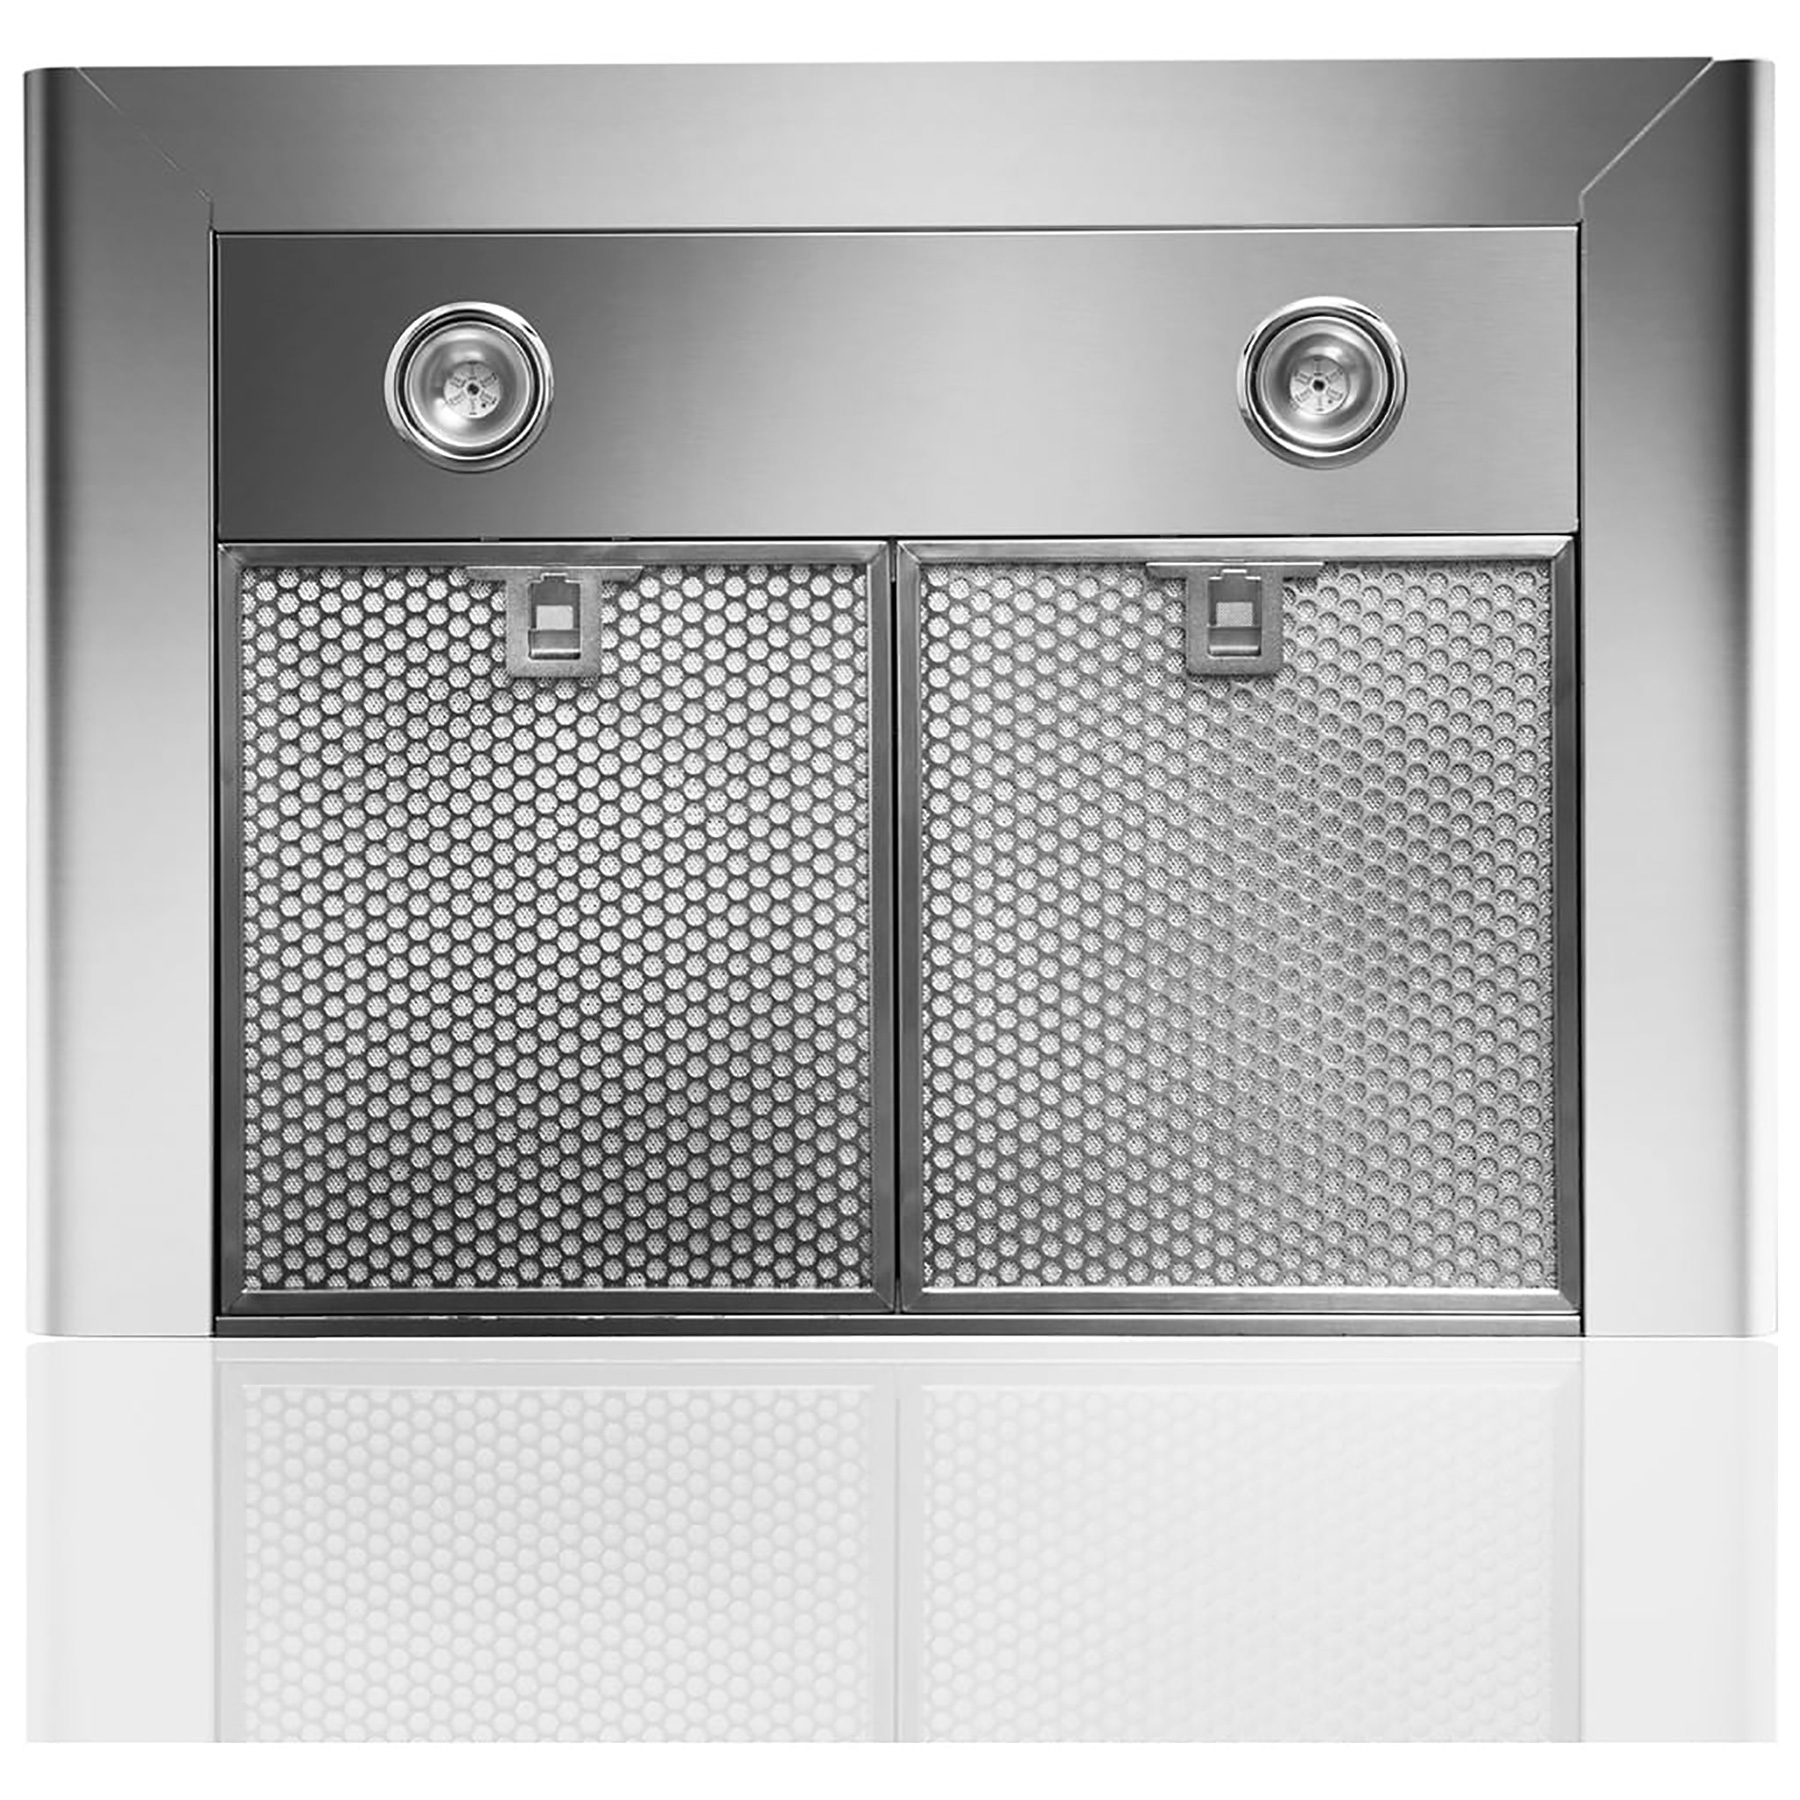 Image of Hotpoint PHC77FLBIX 70cm Chimney Hood in Stainless Steel